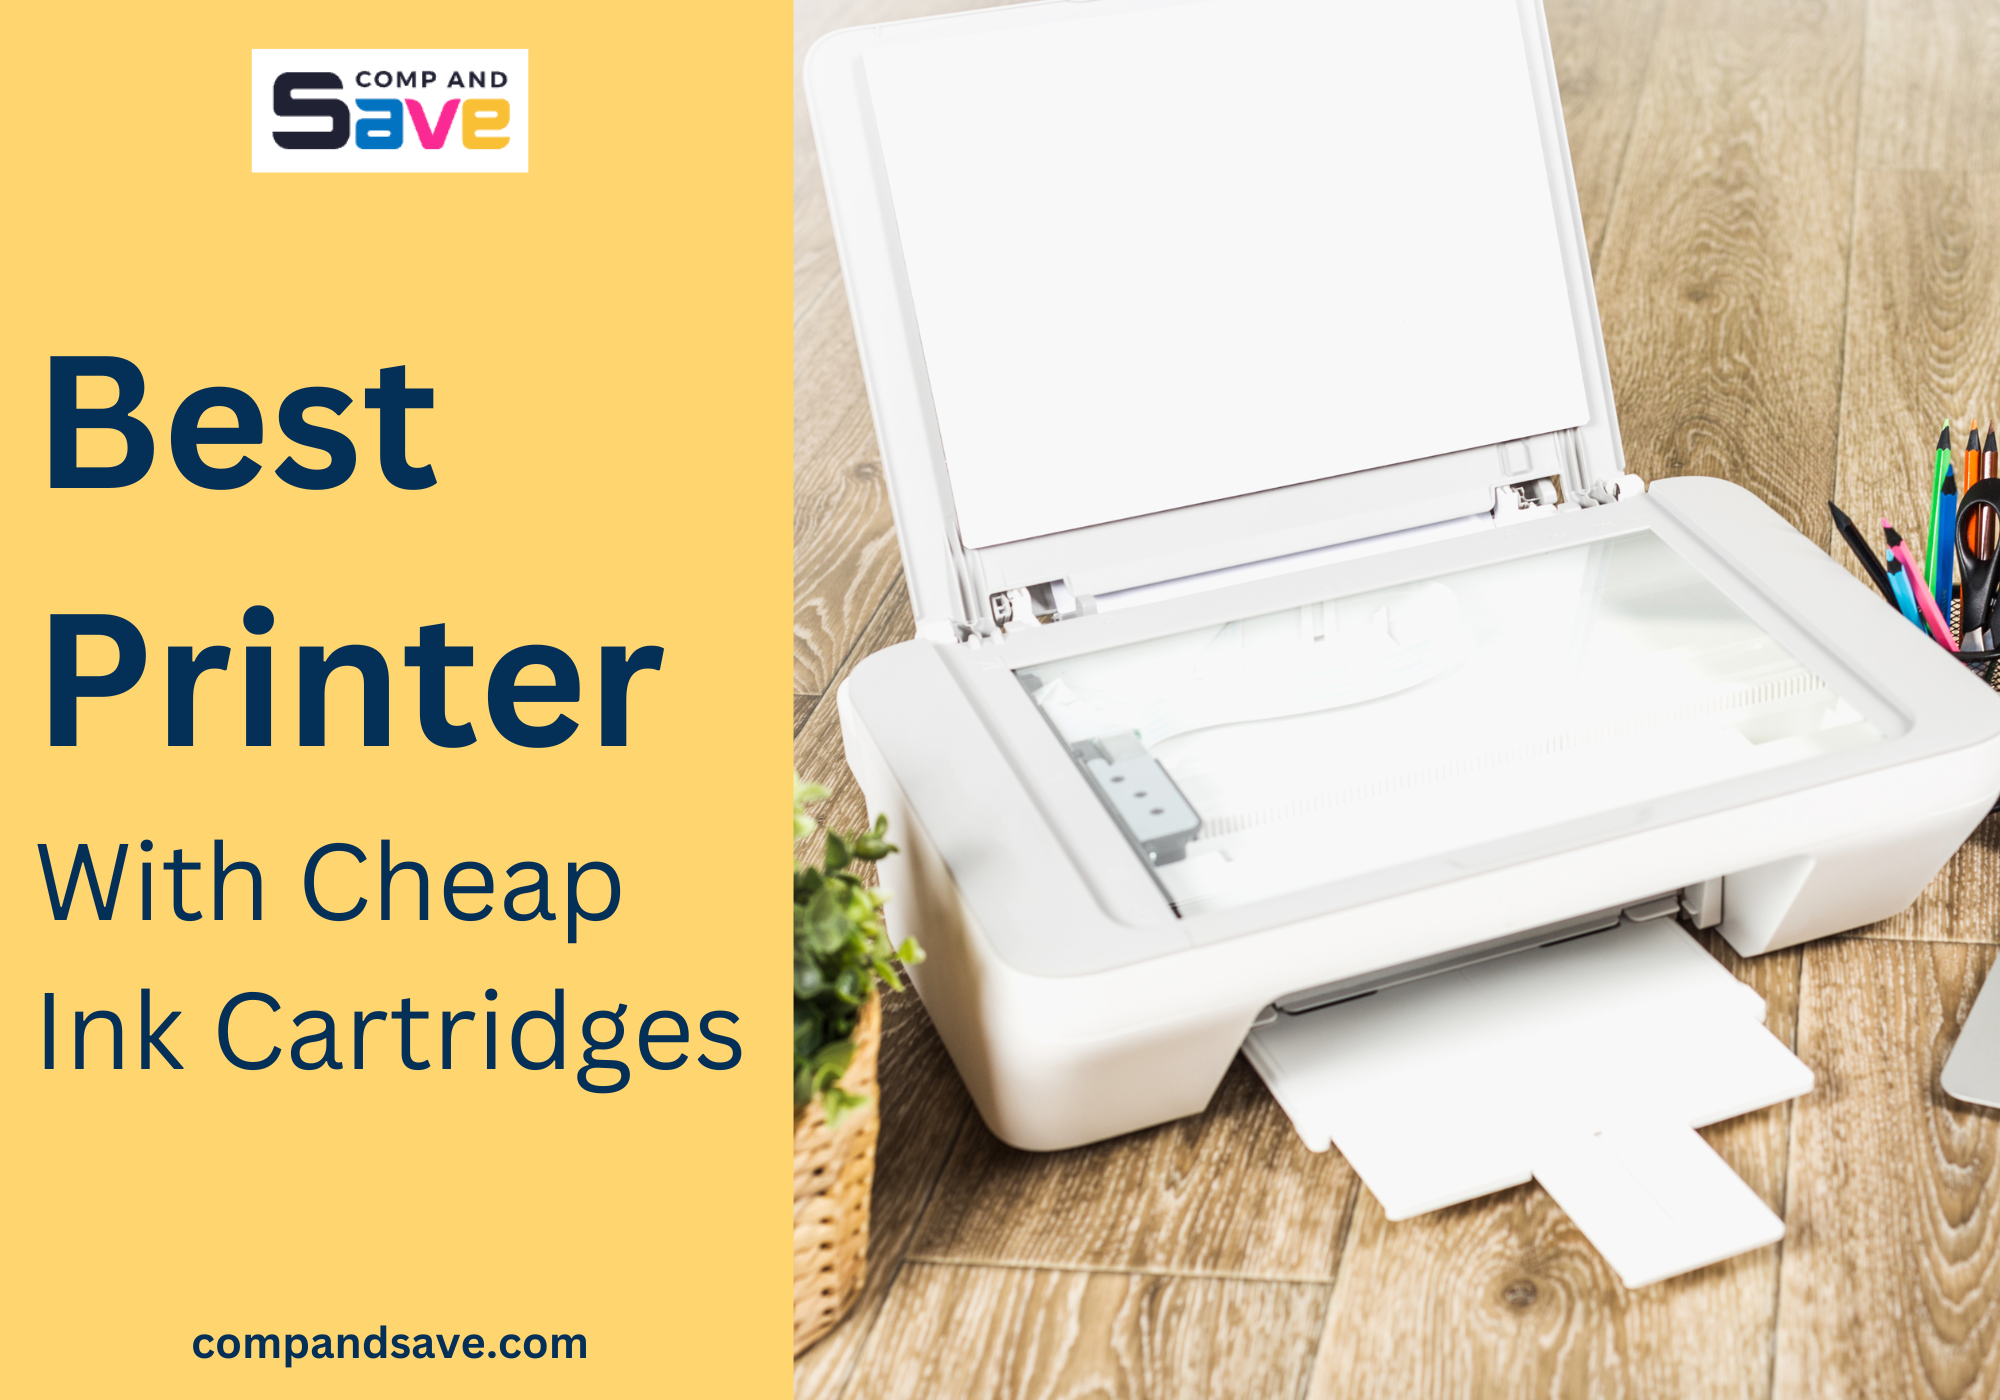 image from Best Printer with Cheap Ink Cartridges - Our Top 5 Picks